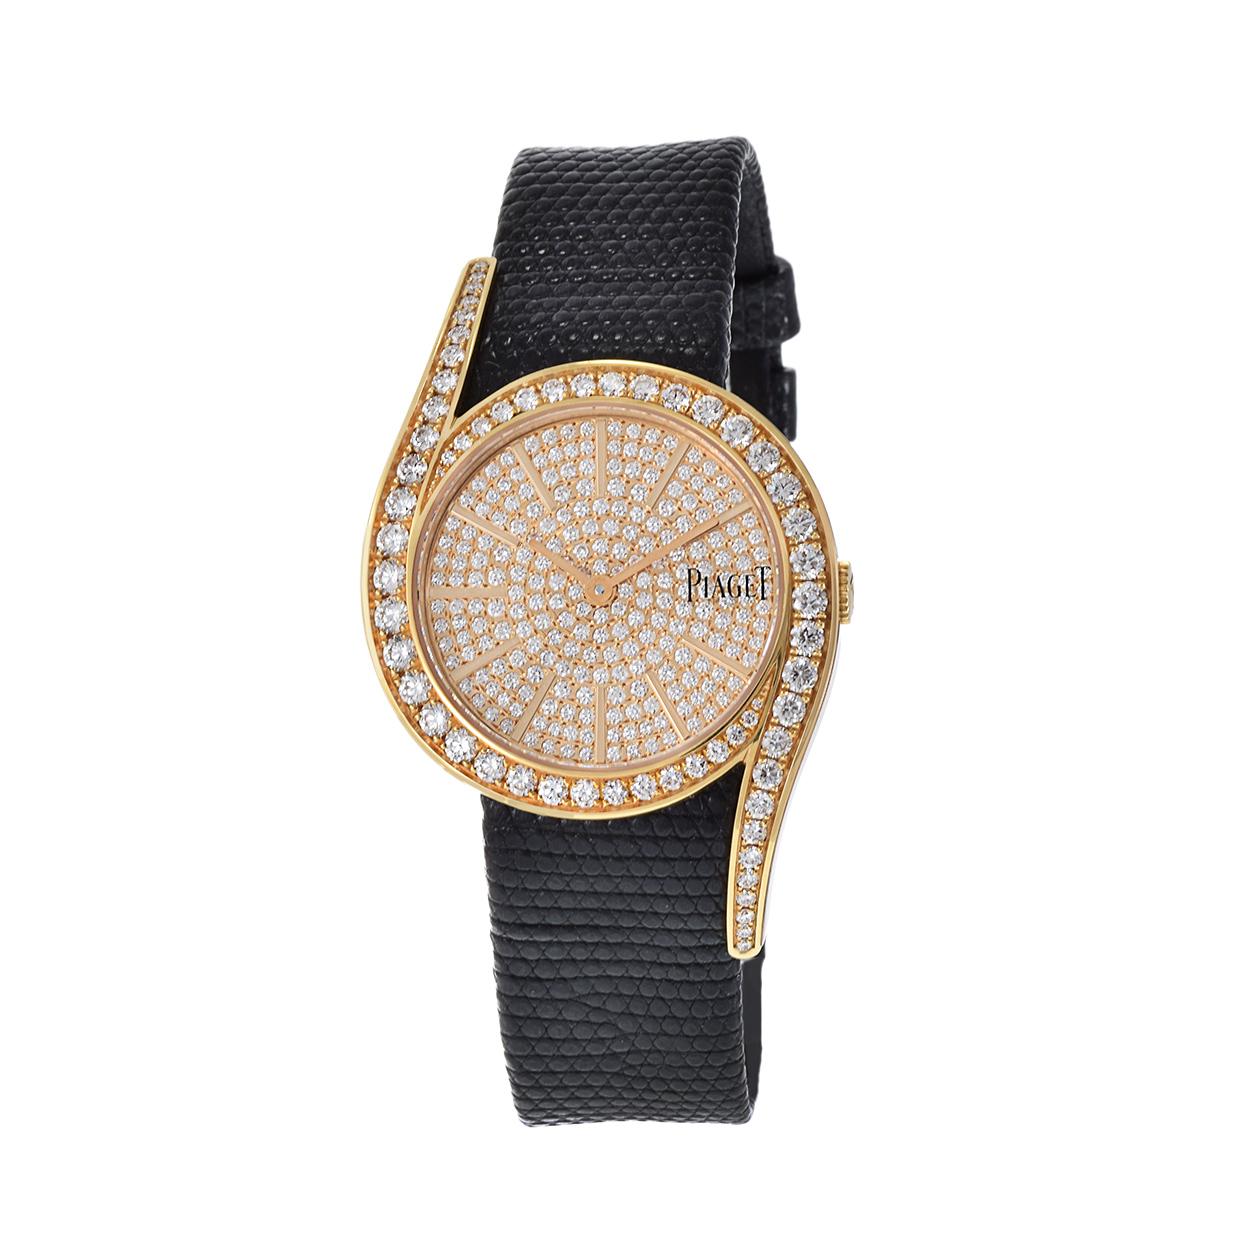 Elevating the elegance of the Limelight Gala watch to new heights, this timepiece, with its 32mm 18K rose gold case embellished with a total of 62 brilliant-cut diamonds (approximately 1.8 carats), now comes paired with a Piaget Black Lizard Strap.